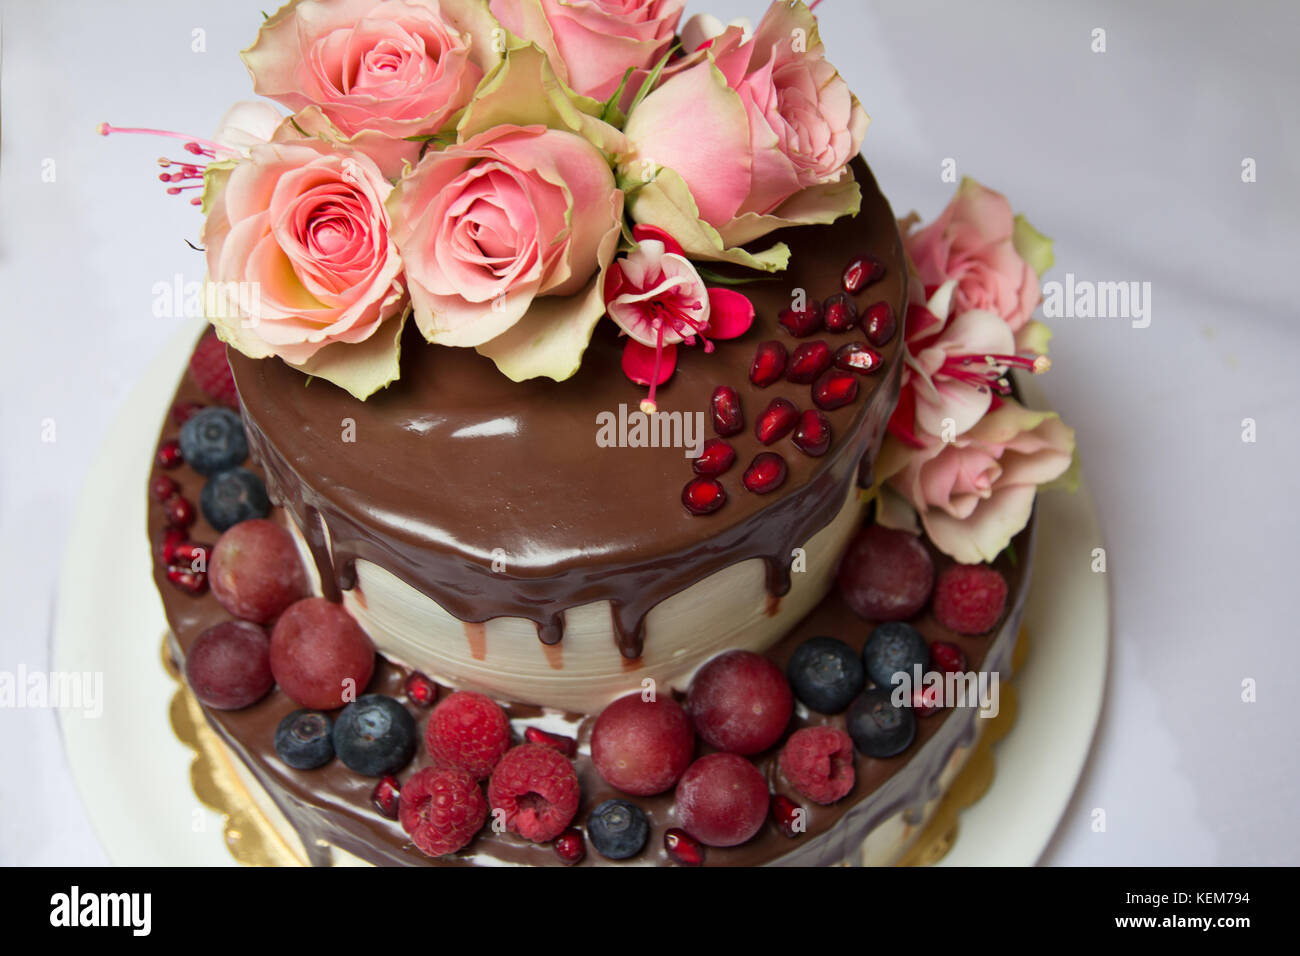 cake with chockolate streaks, berries and flowers Stock Photo